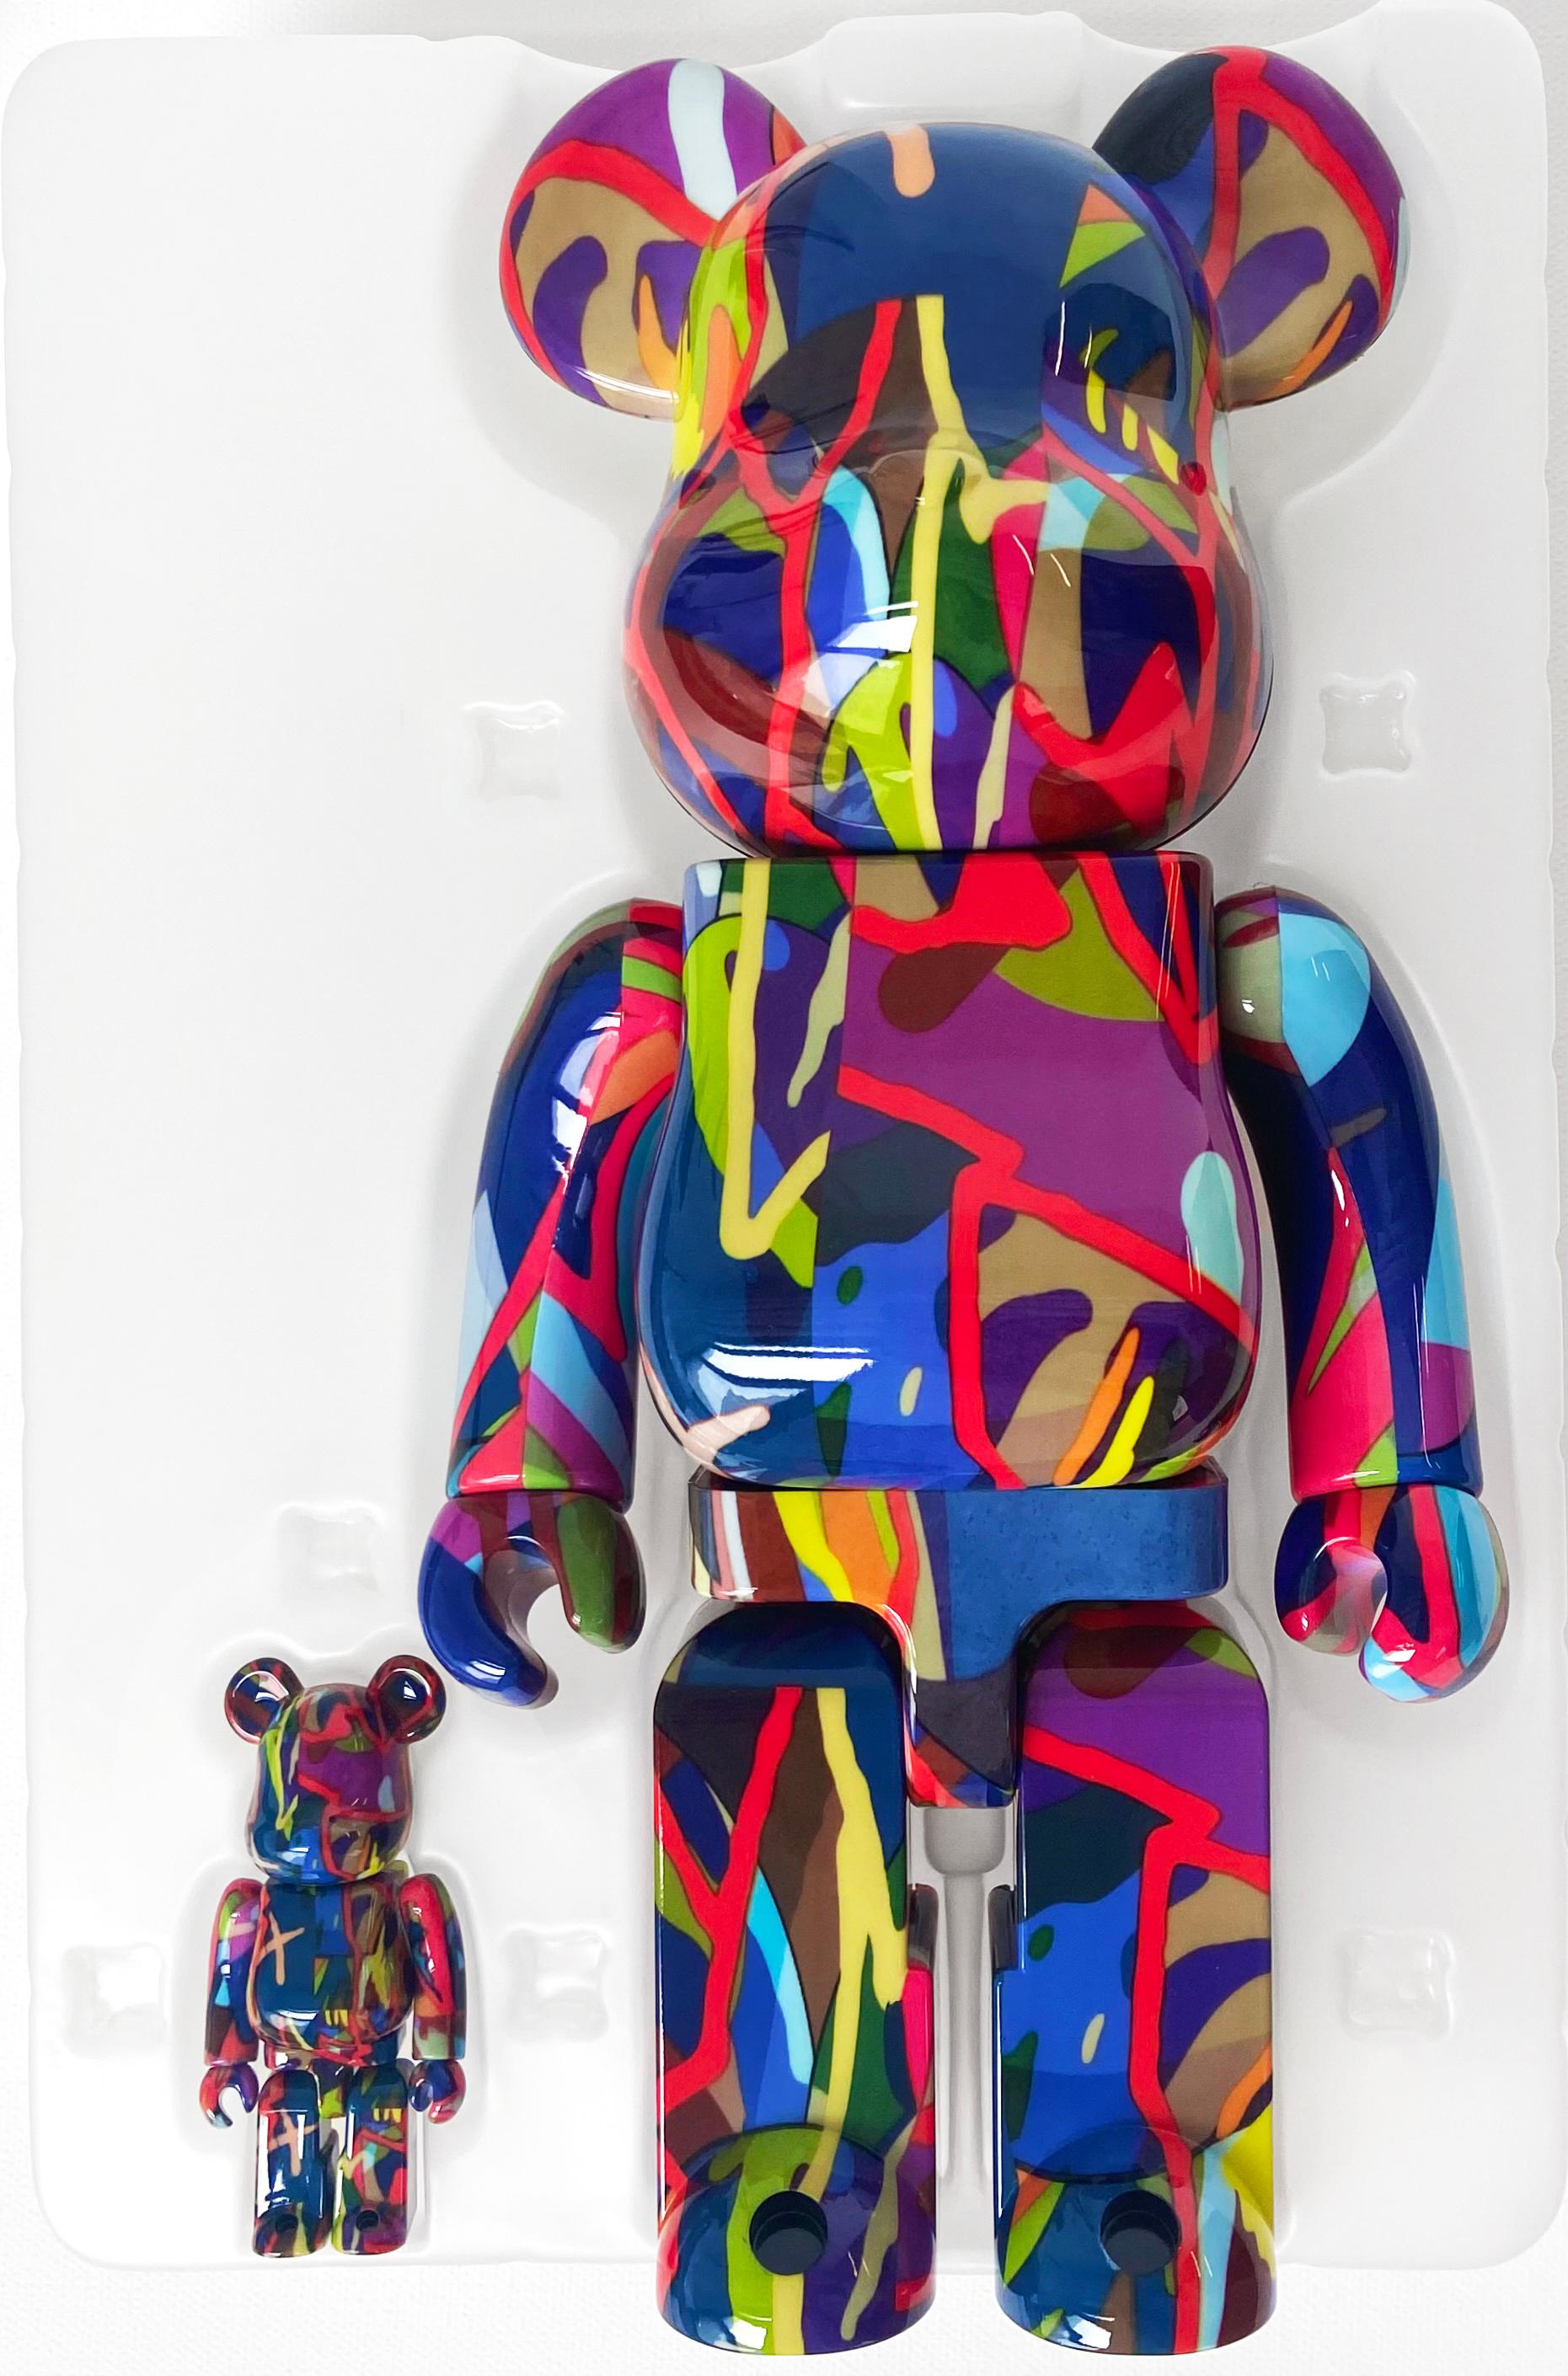 KAWS Tension Bearbrick 400%:
This much sought-after KAWS Tension Be@rbrick figure features the artist's signature 